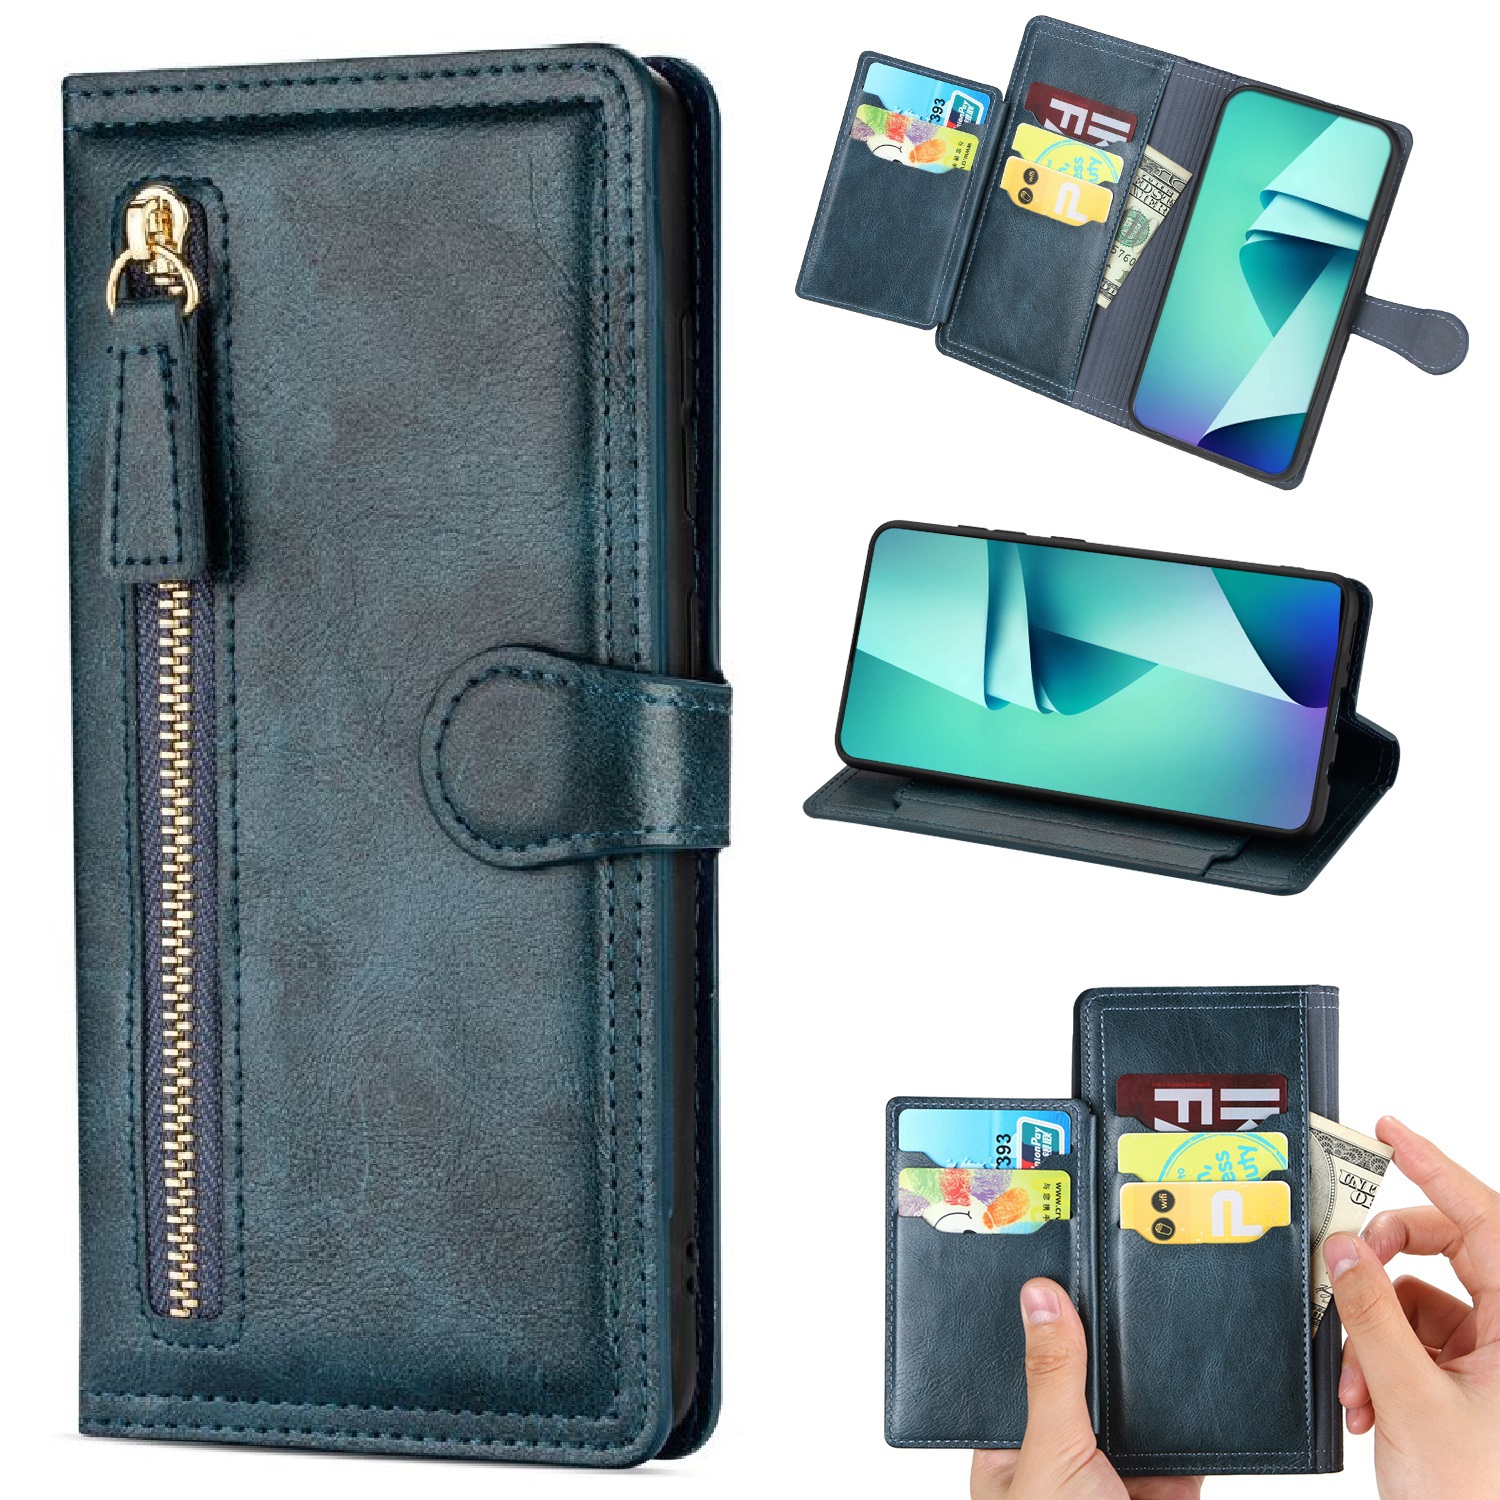 PIERO Leather Zipper Wallet Case Flip Card Holder Stand Phone Cover Premium Leather Flip Cover for Samsung Galaxy S22 -Cyan (FREE SHIPPING)